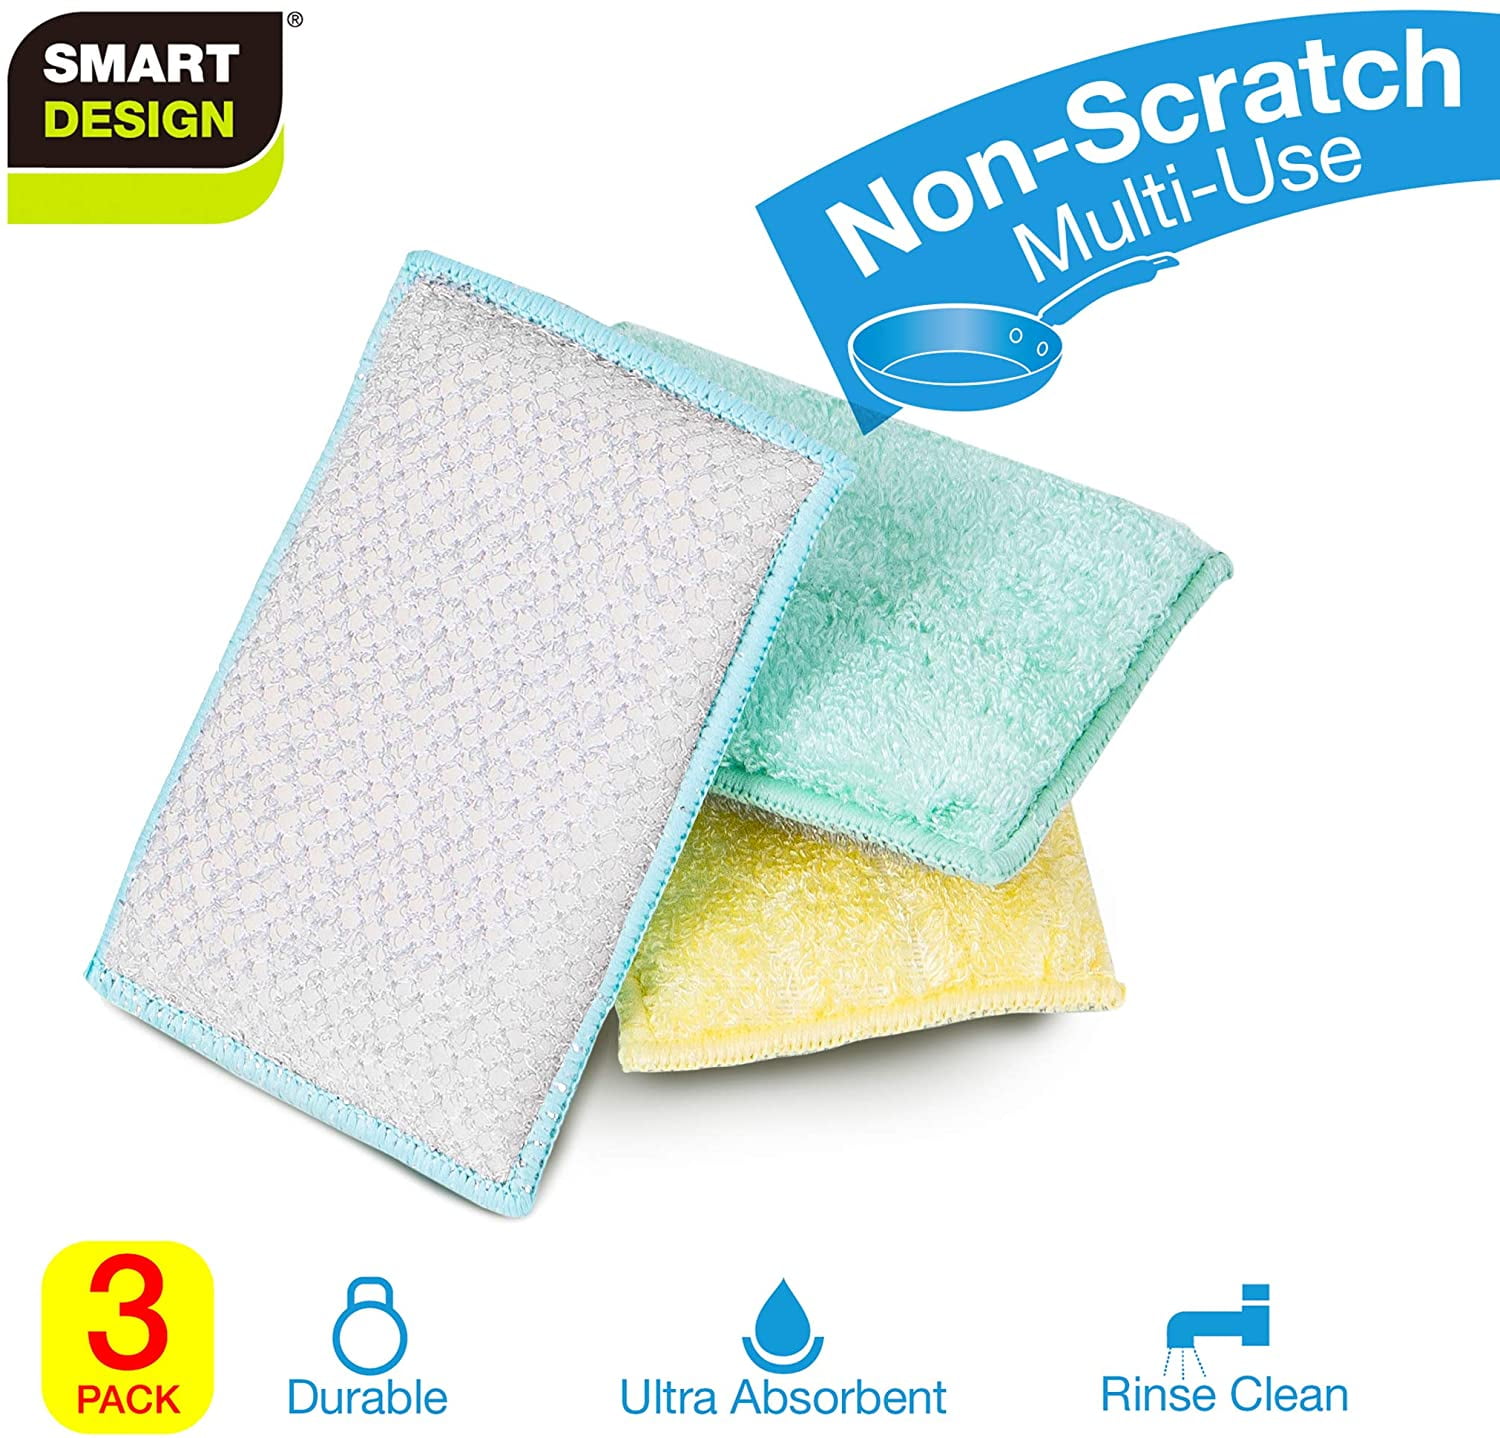 ITTAHO 9 Pack Refills, Non-Scratch Dish Sponge Replacement (Dishwand H